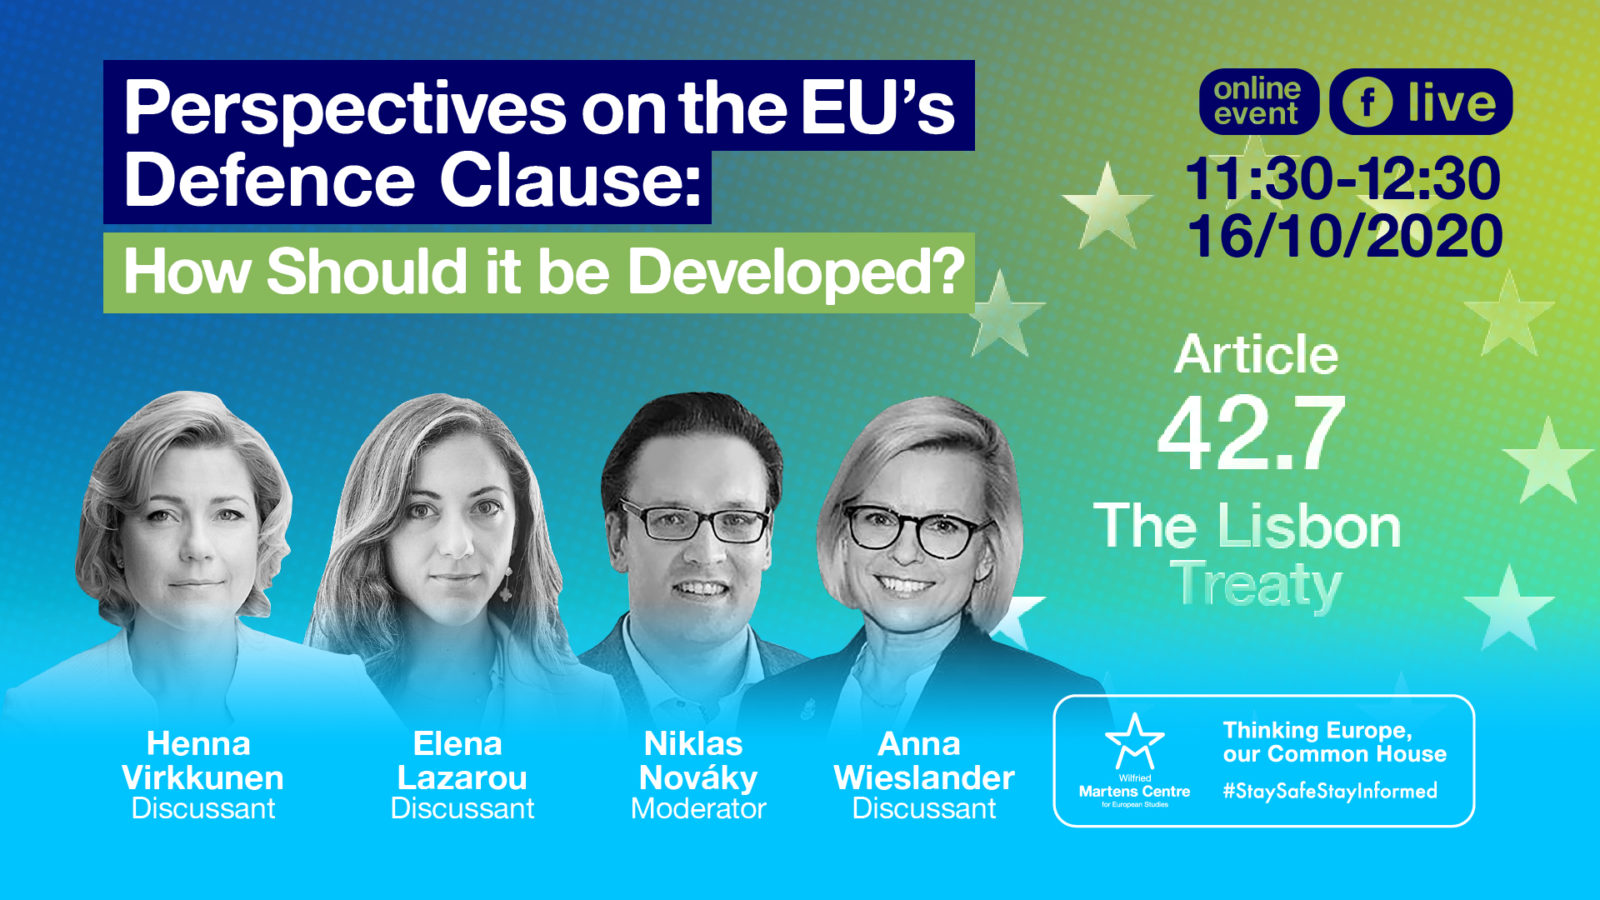 Online Event ‘Perspectives on the EU’s Defence Clause: How Should it be Developed?’